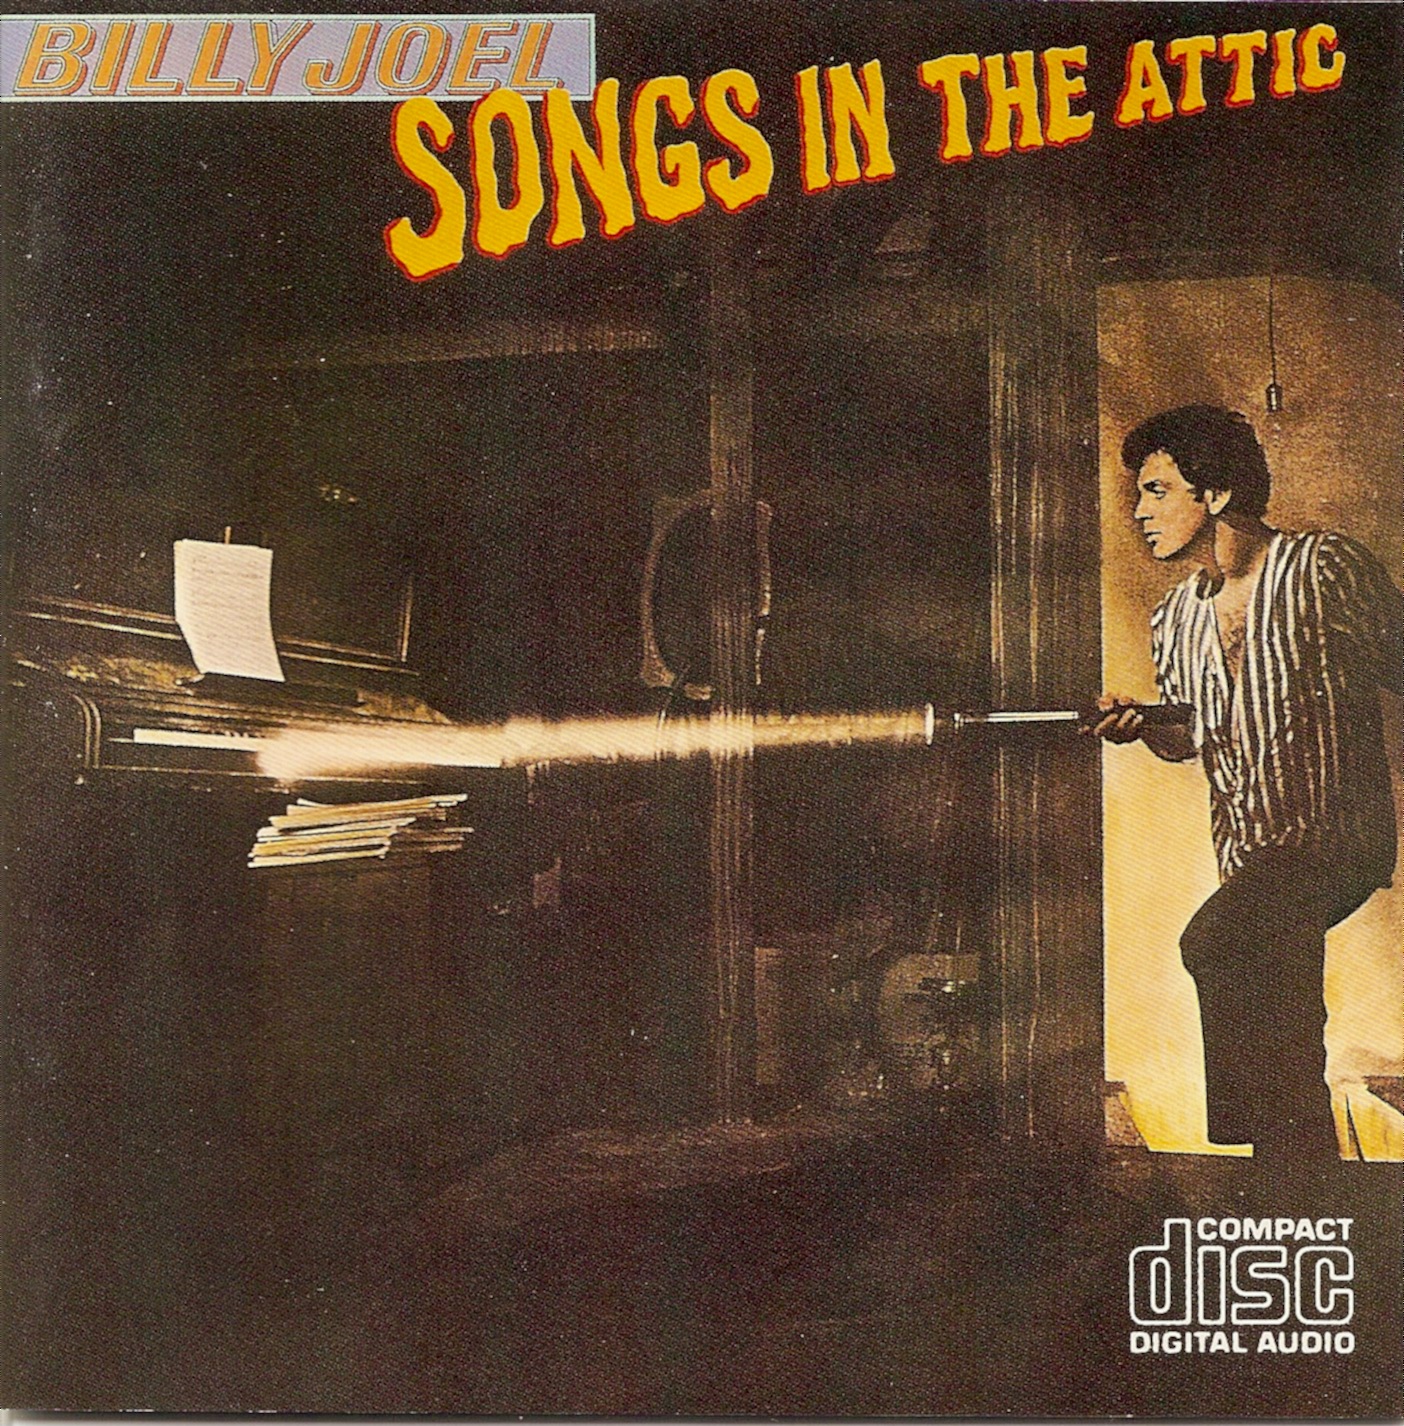 The First Pressing CD Collection: Billy Joel - Songs in the Attic1404 x 1426